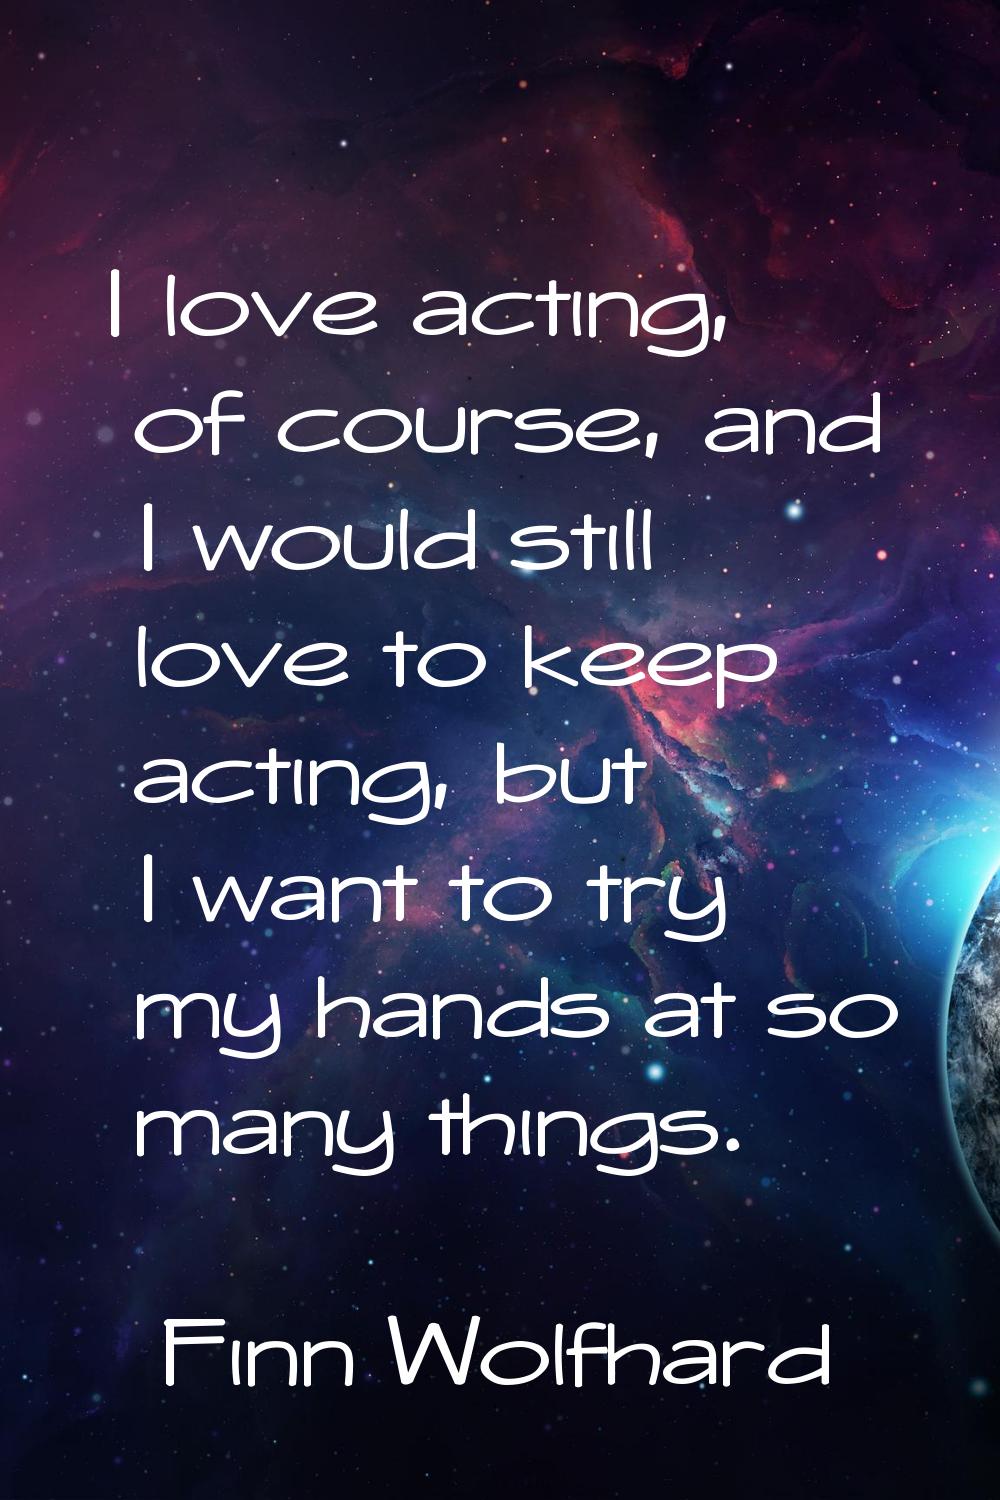 I love acting, of course, and I would still love to keep acting, but I want to try my hands at so m